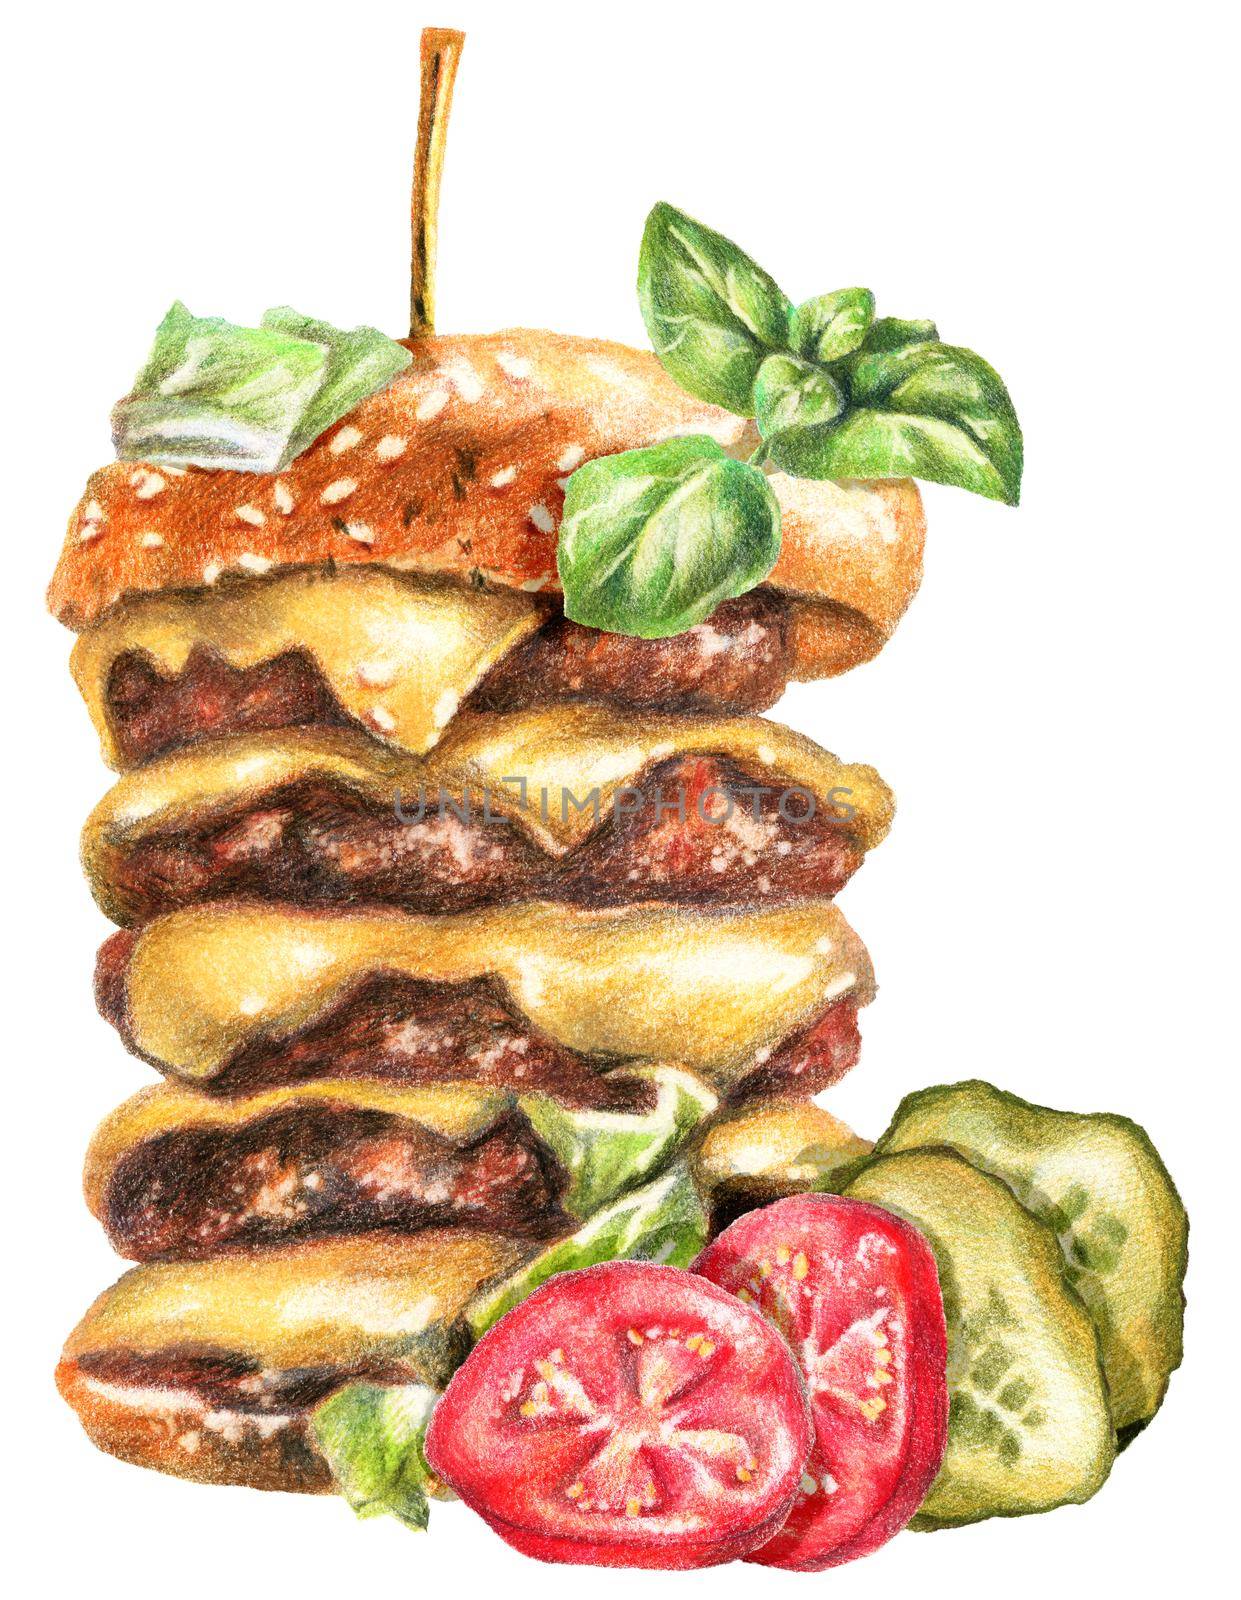 Color pencils realistic food illustration of burger, tomatoes and cucumber slices. Hand-drawn object on white background.